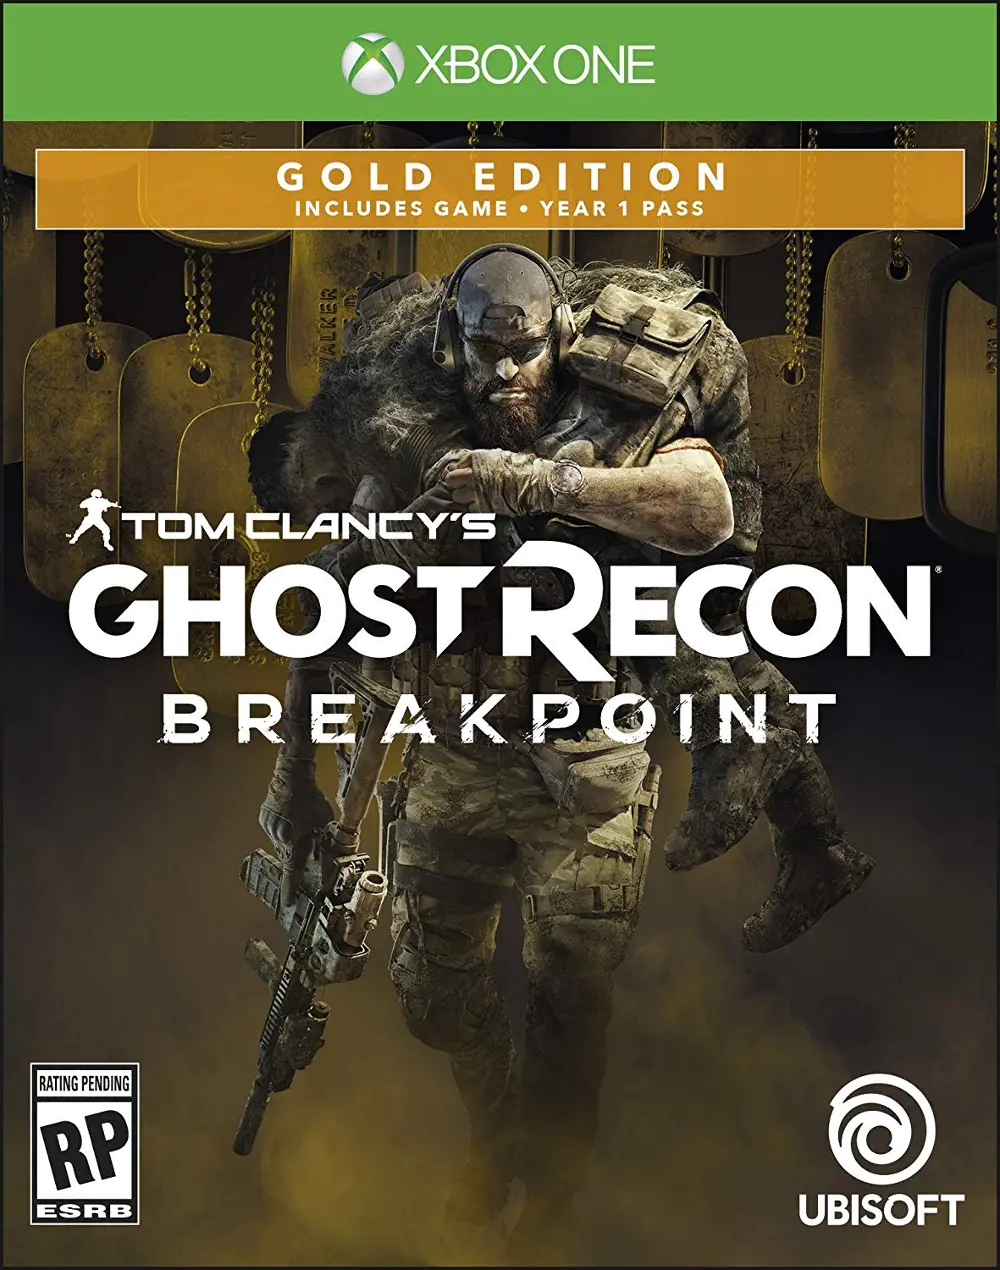 XB1/TOM_GHOST_BRKPNT Tom Clancy's Ghost Recon Breakpoint: Gold Edition - Xbox One-1